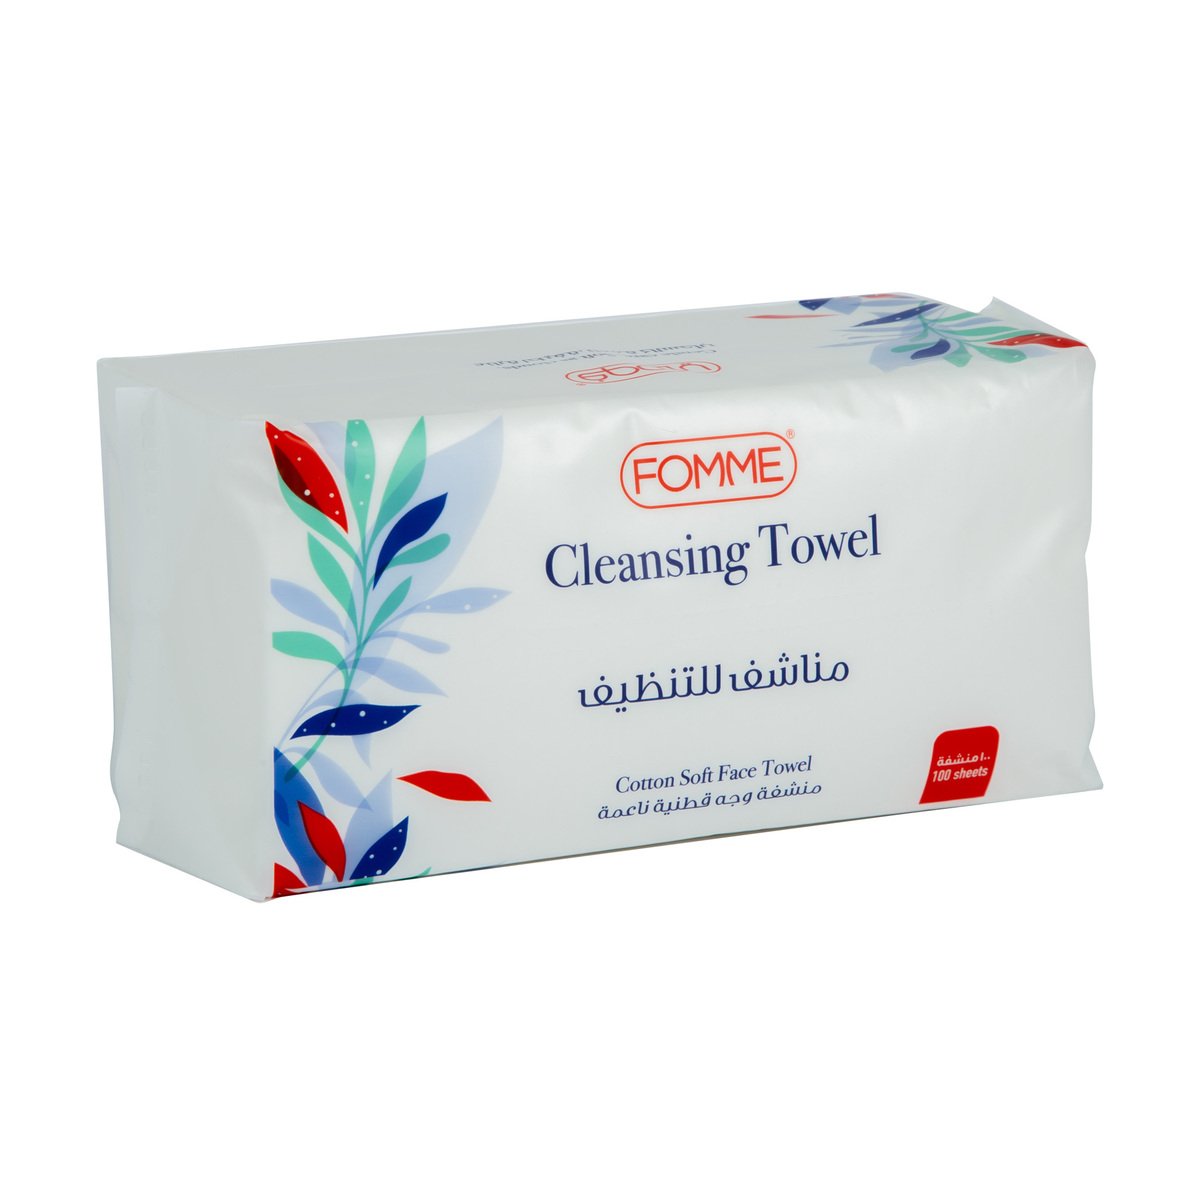 Fomme Cleansing Towel 100pcs